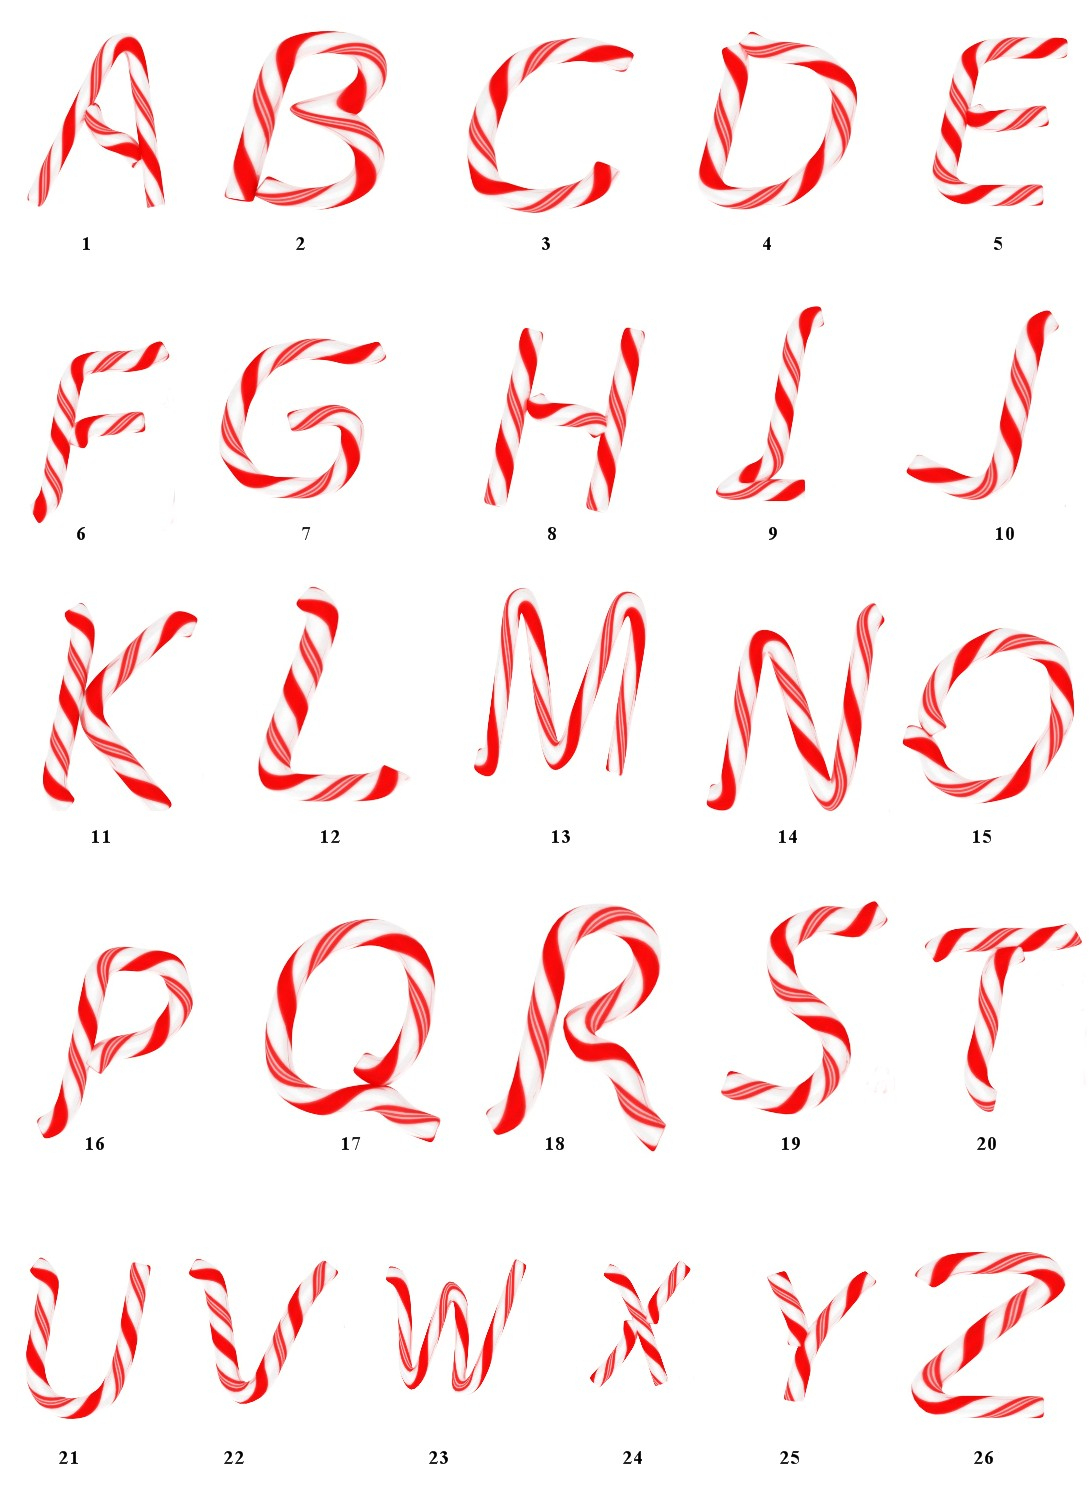 13 Candy Land Letter Font Images - Free Printable Candy Cane Font - Free Printable Bubble Letters Font